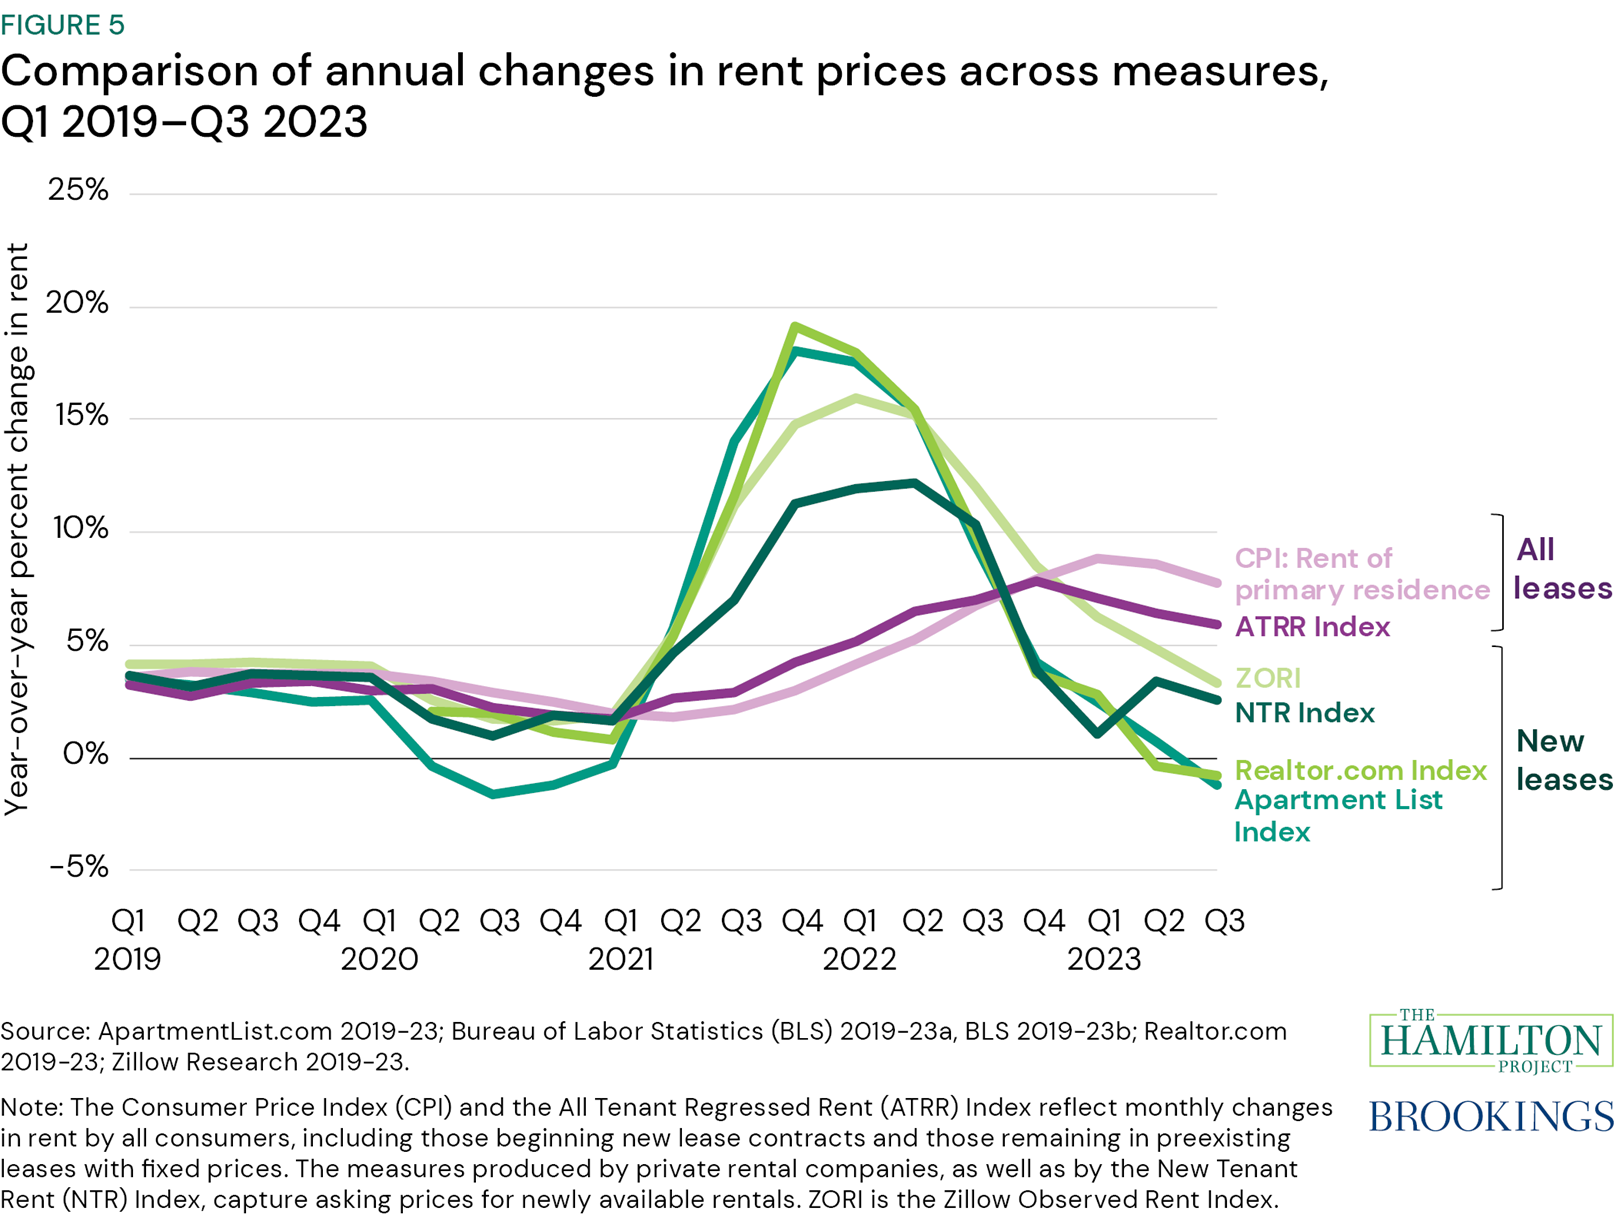 Figure 5: Comparison of annual changes in rent prices across measures, Q1 2019–Q3 2023. Figure 5 shows the year-over-year change in various measures of rents from the first quarter of 2019 to the third quarter of 2023. Measures of rents differ, primarily by whether they take into account all leases or only new leases, as well as by the types of housing units they incorporate (Adams et al. 2022; Weller and Correa 2023). Specifically, the Consumer Price Index (CPI) and the All Tenant Regressed Rent (ATRR) Index track rent growth facing both existing and new tenants. In contrast, the Zillow Observed Rent Index (ZORI), ApartmentList.com Index, Realtor.com Index, and the New Tenant Rent (NTR) Index all are repeat-rent indices that track rent growth that new tenants face (Adams et al. 2022). Notwithstanding these differences, all measures consistently show that inflation in the rental market slowed somewhat in 2020 and then rose substantially thereafter.